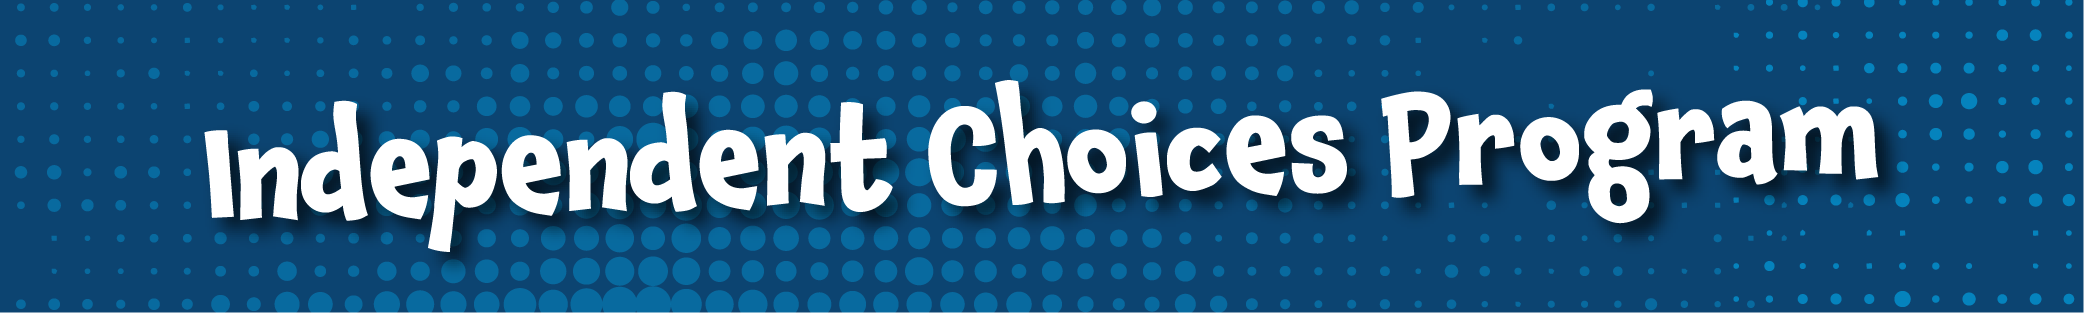 Independent Choices Program